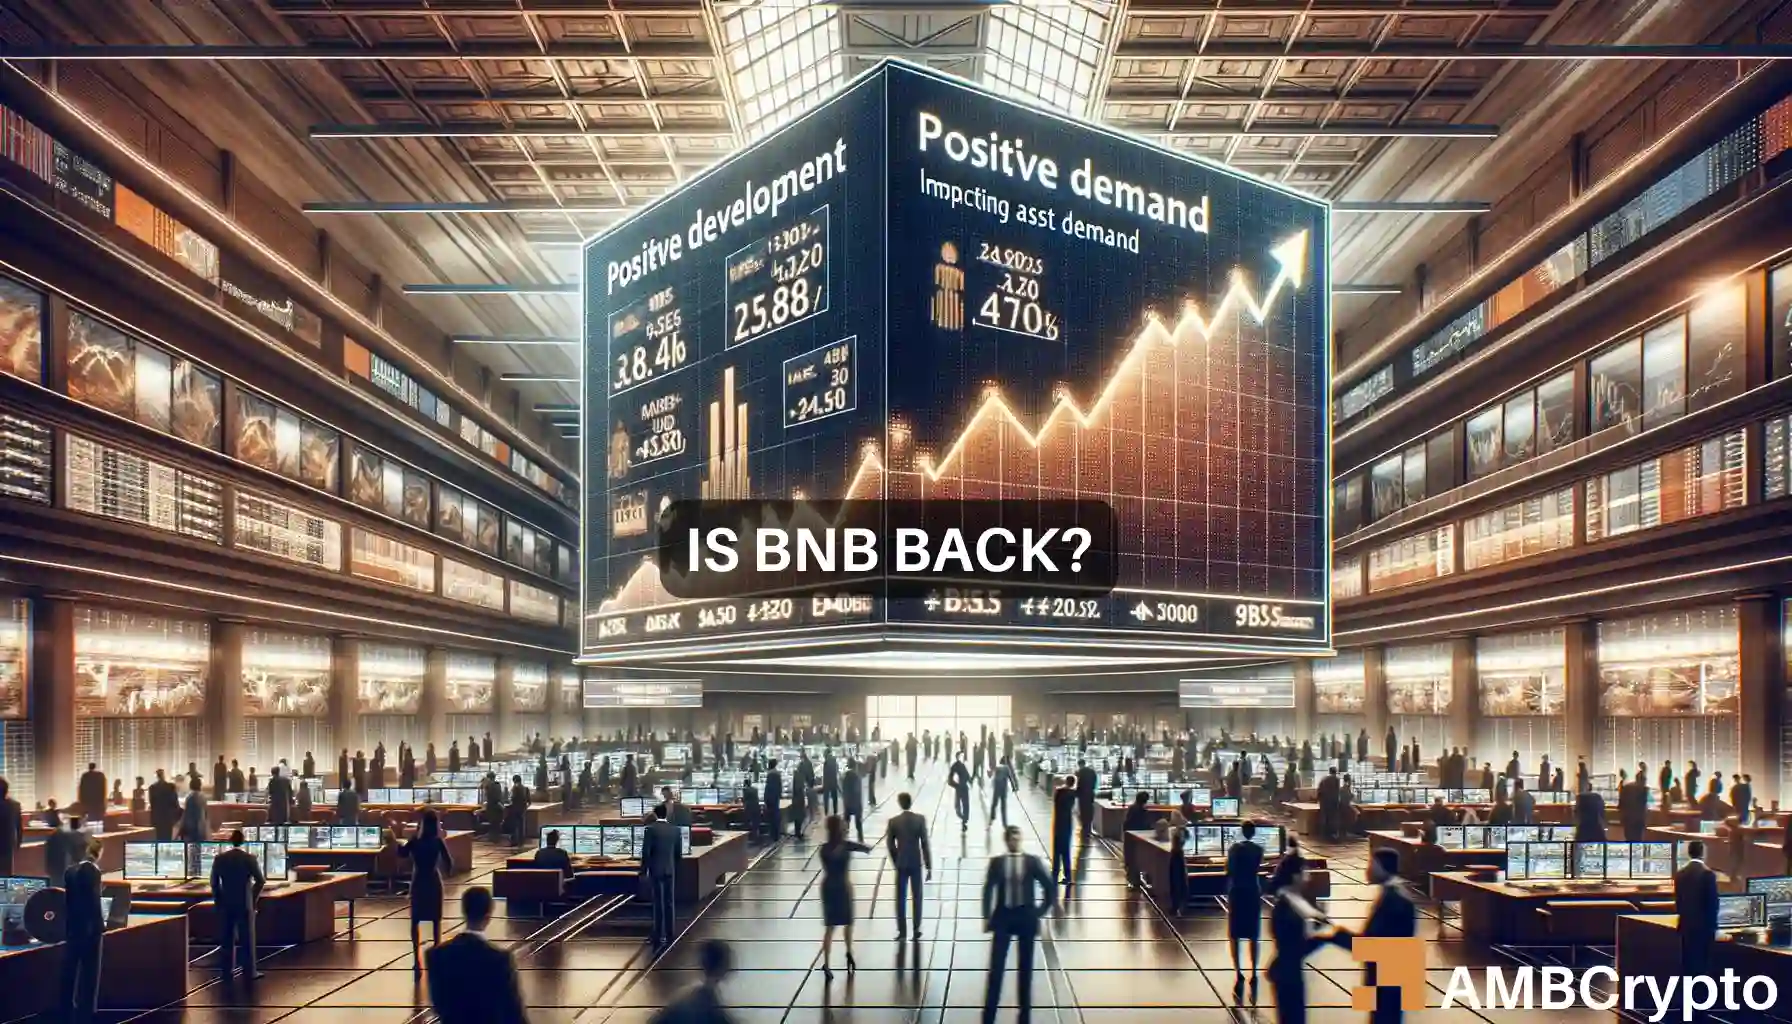 BNB drops only 0.35% drop amidst crypto bloodbath: Sign of decoupling?